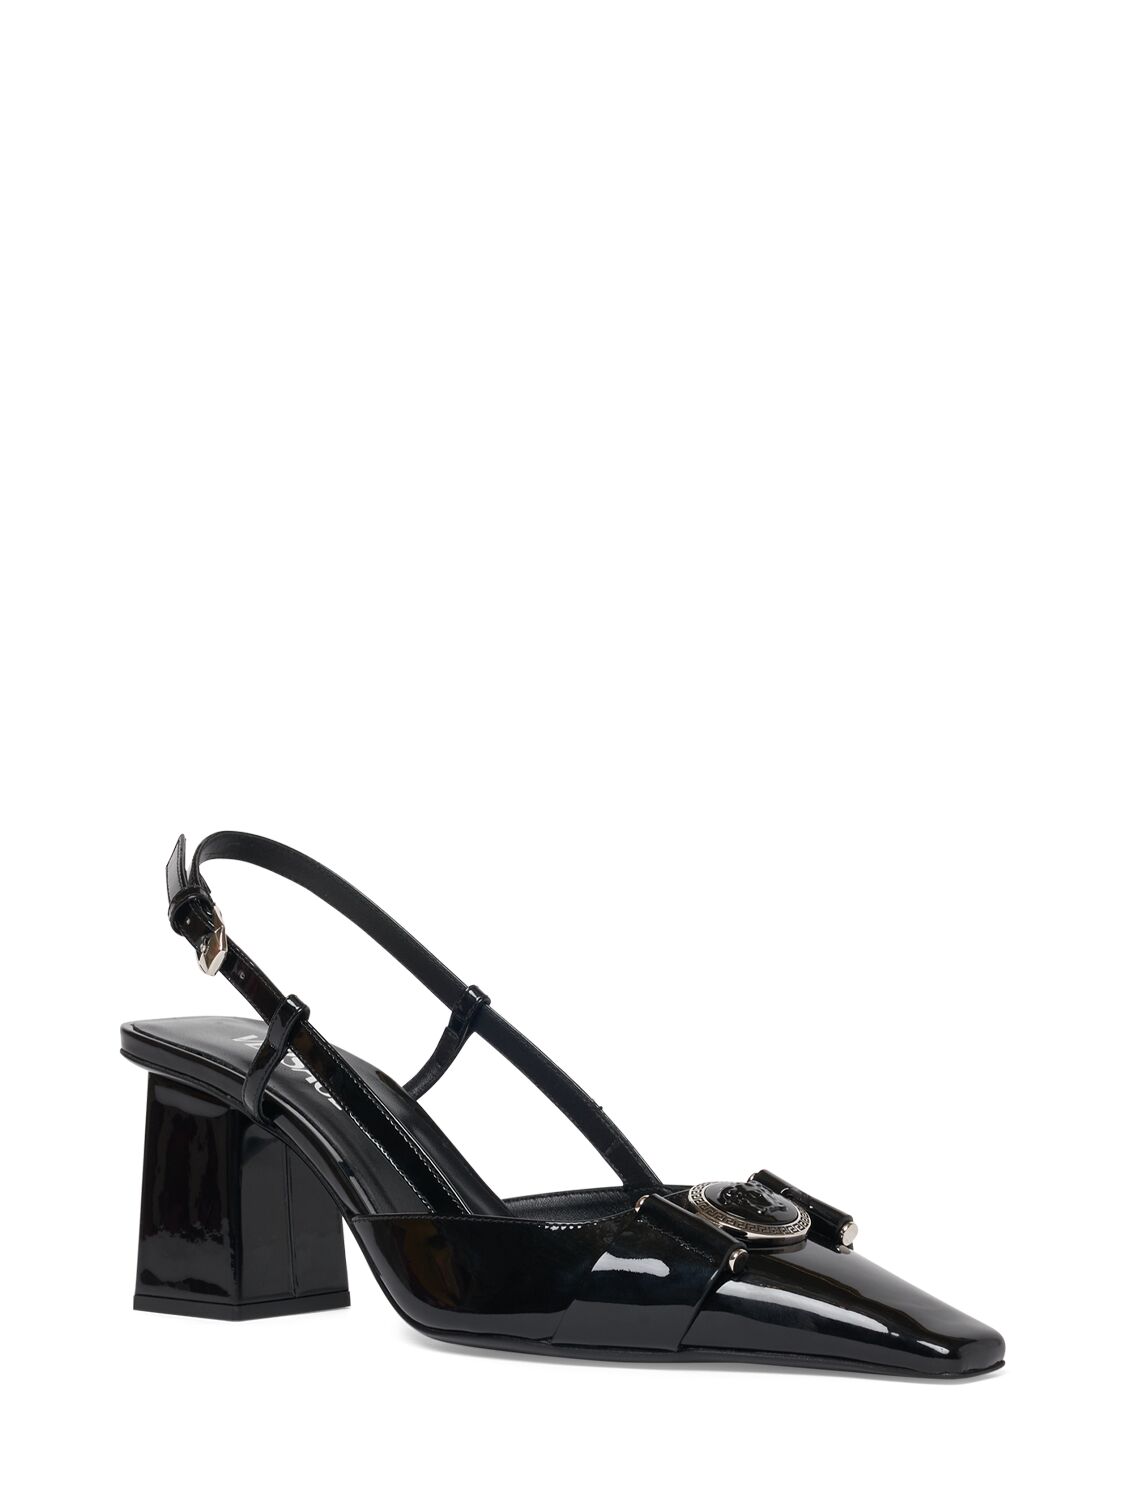 Shop Versace 70mm Patent Leather Slingback Pumps In Black